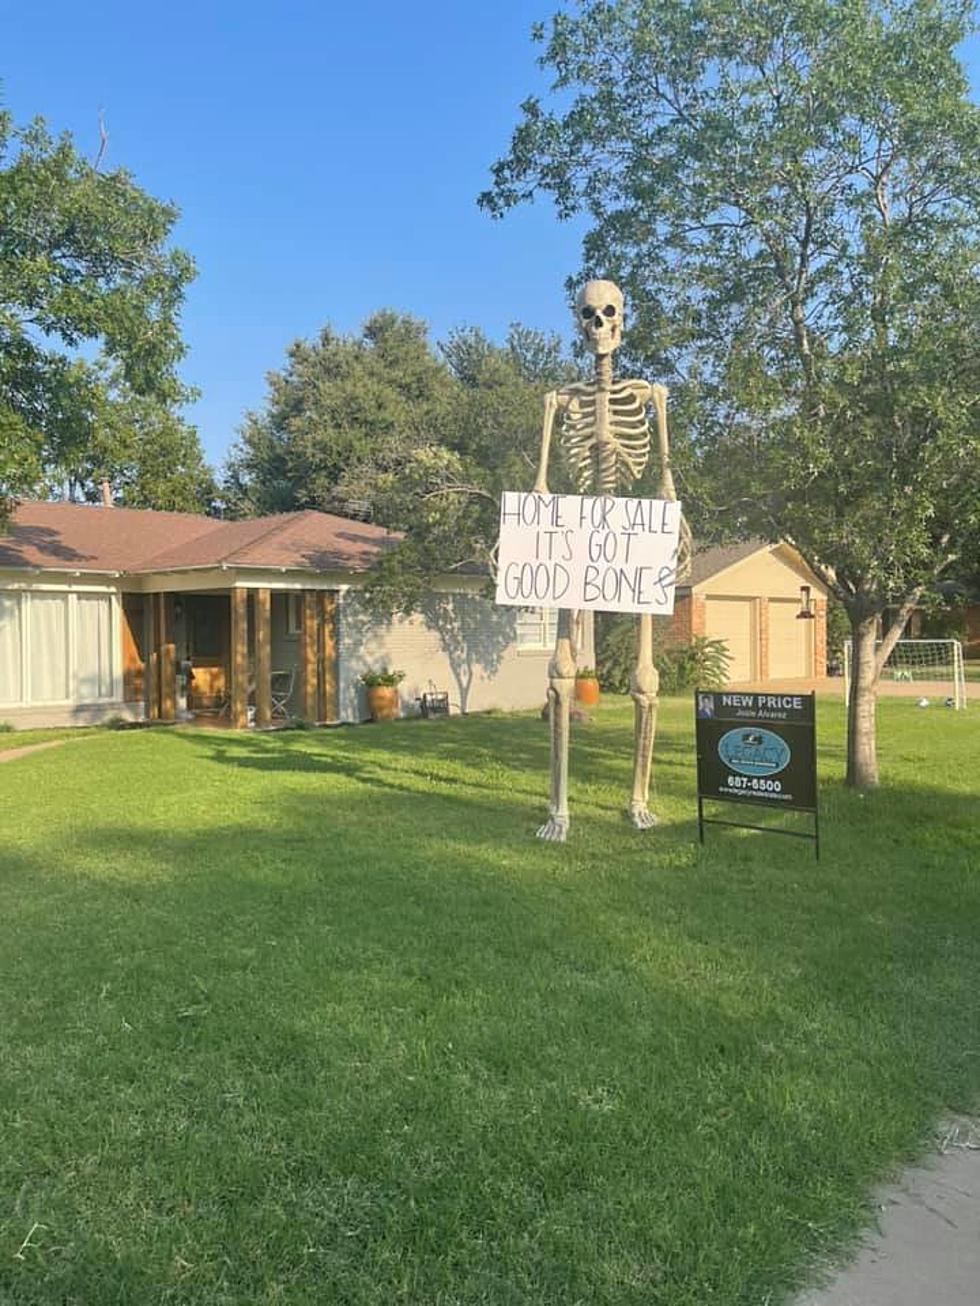 Texas Family Uses Giant Skeletons to Try and Sell Home